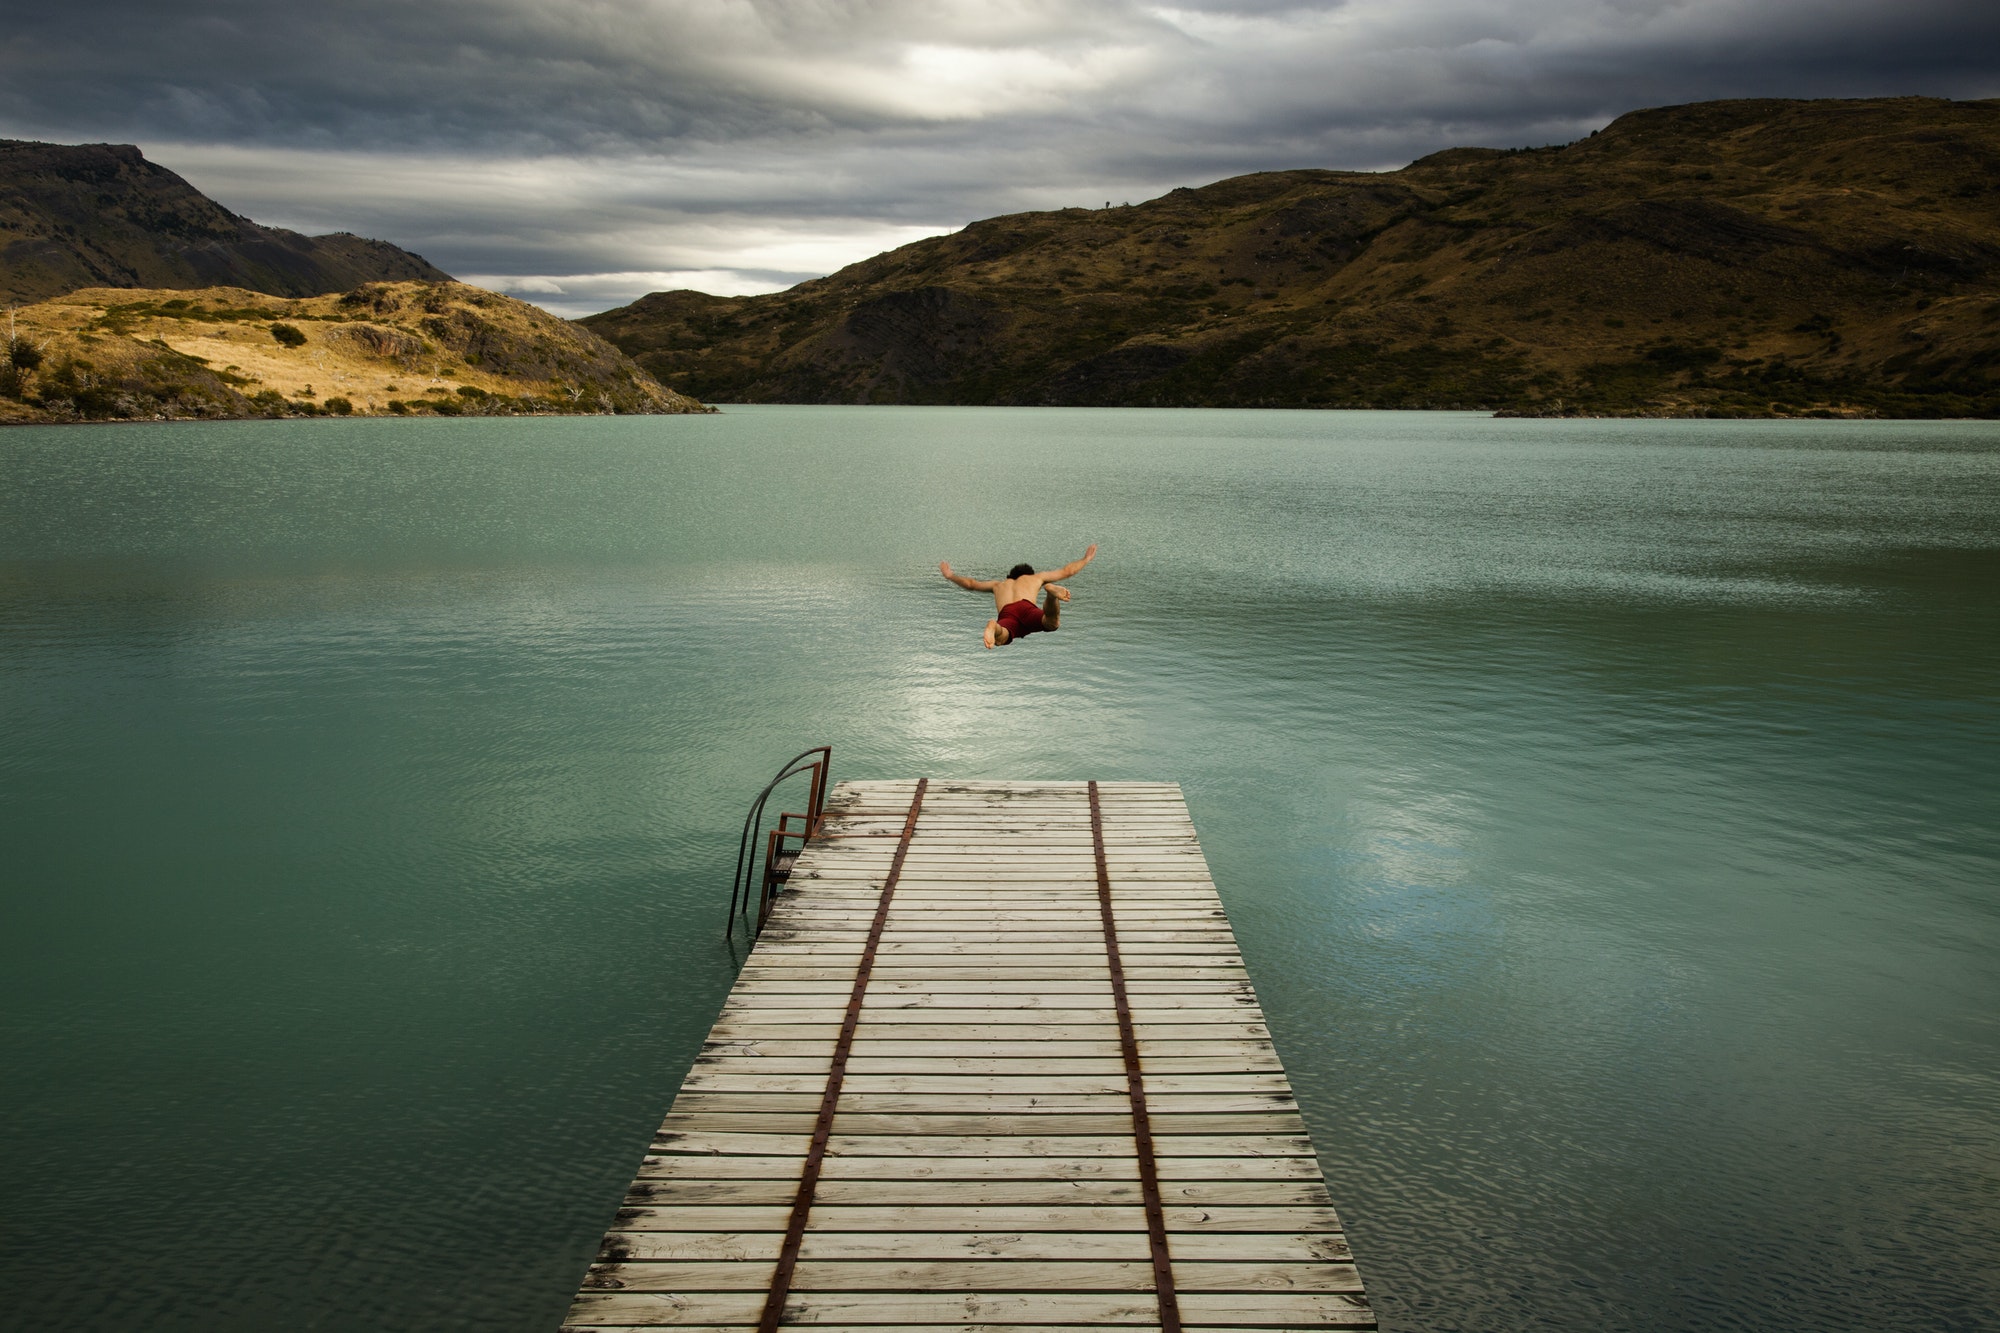 A young man in mid air, diving off a wooden pier, into calm lake, Chile.